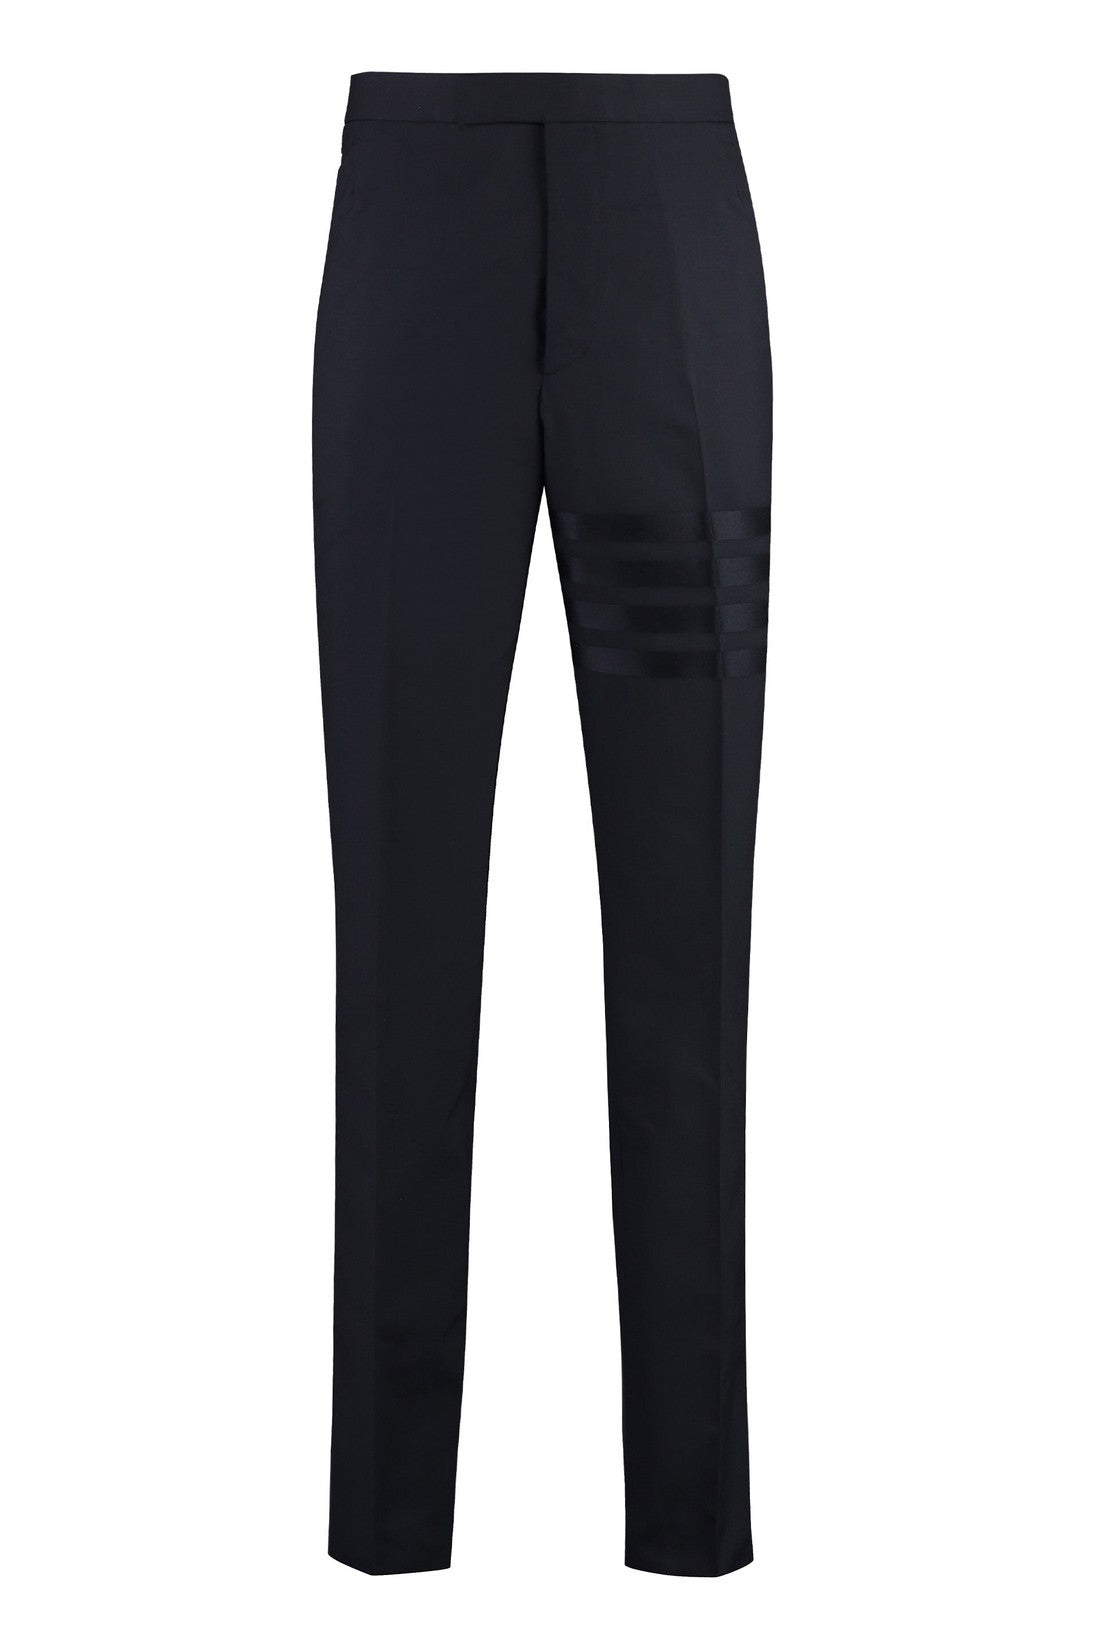 Thom Browne-OUTLET-SALE-Wool tailored trousers-ARCHIVIST